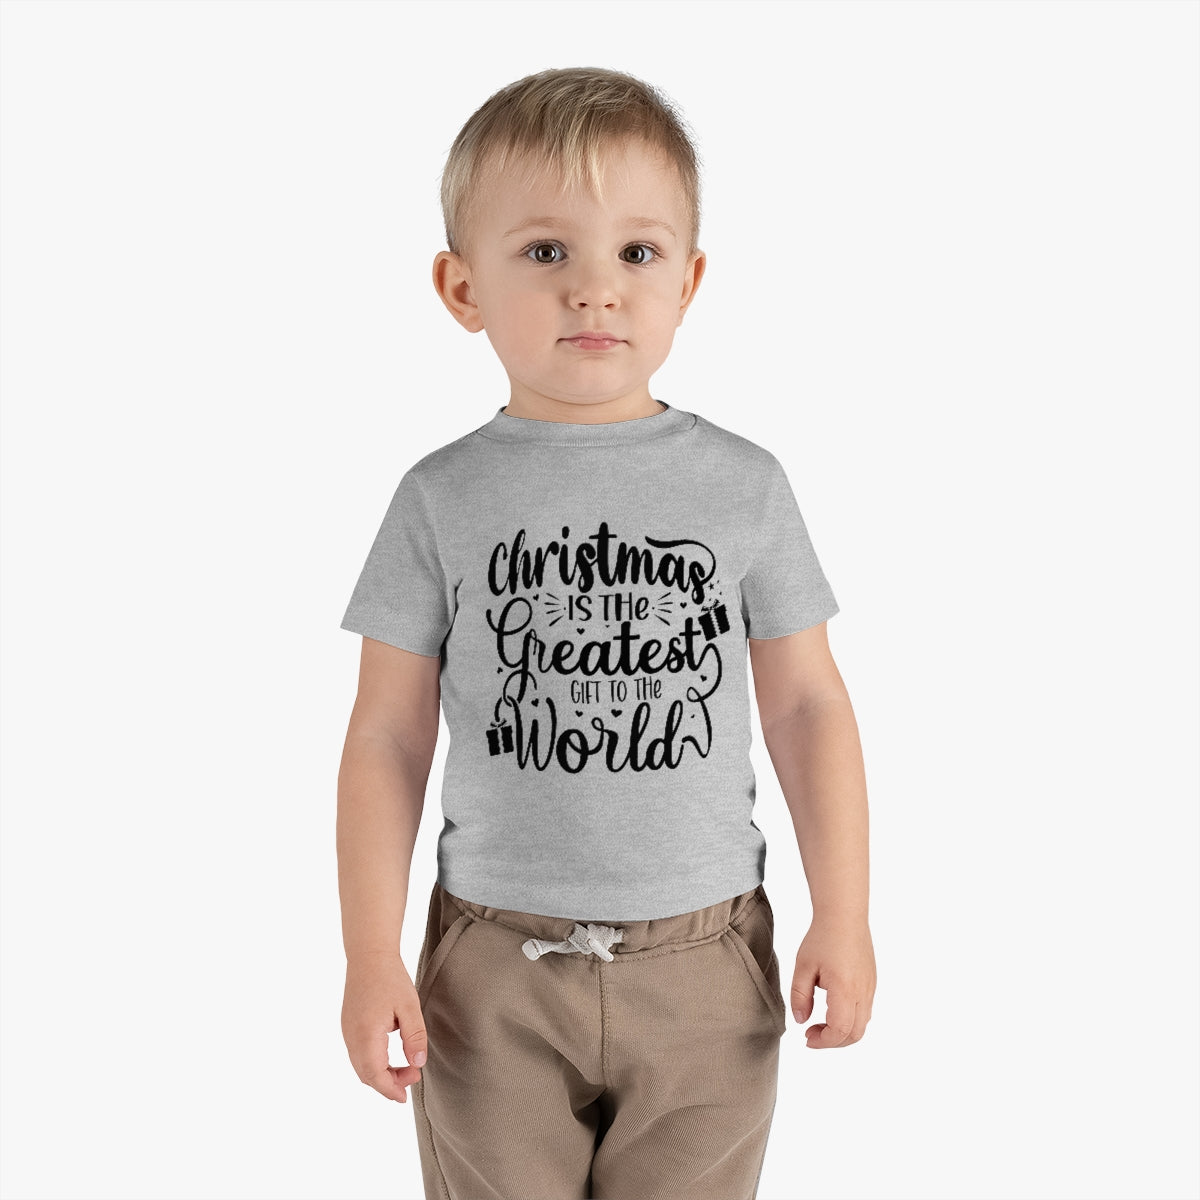 Greatest gift to the world Christmas Tee, Baby Tee, Infant Tee, Christmas Baby Tee